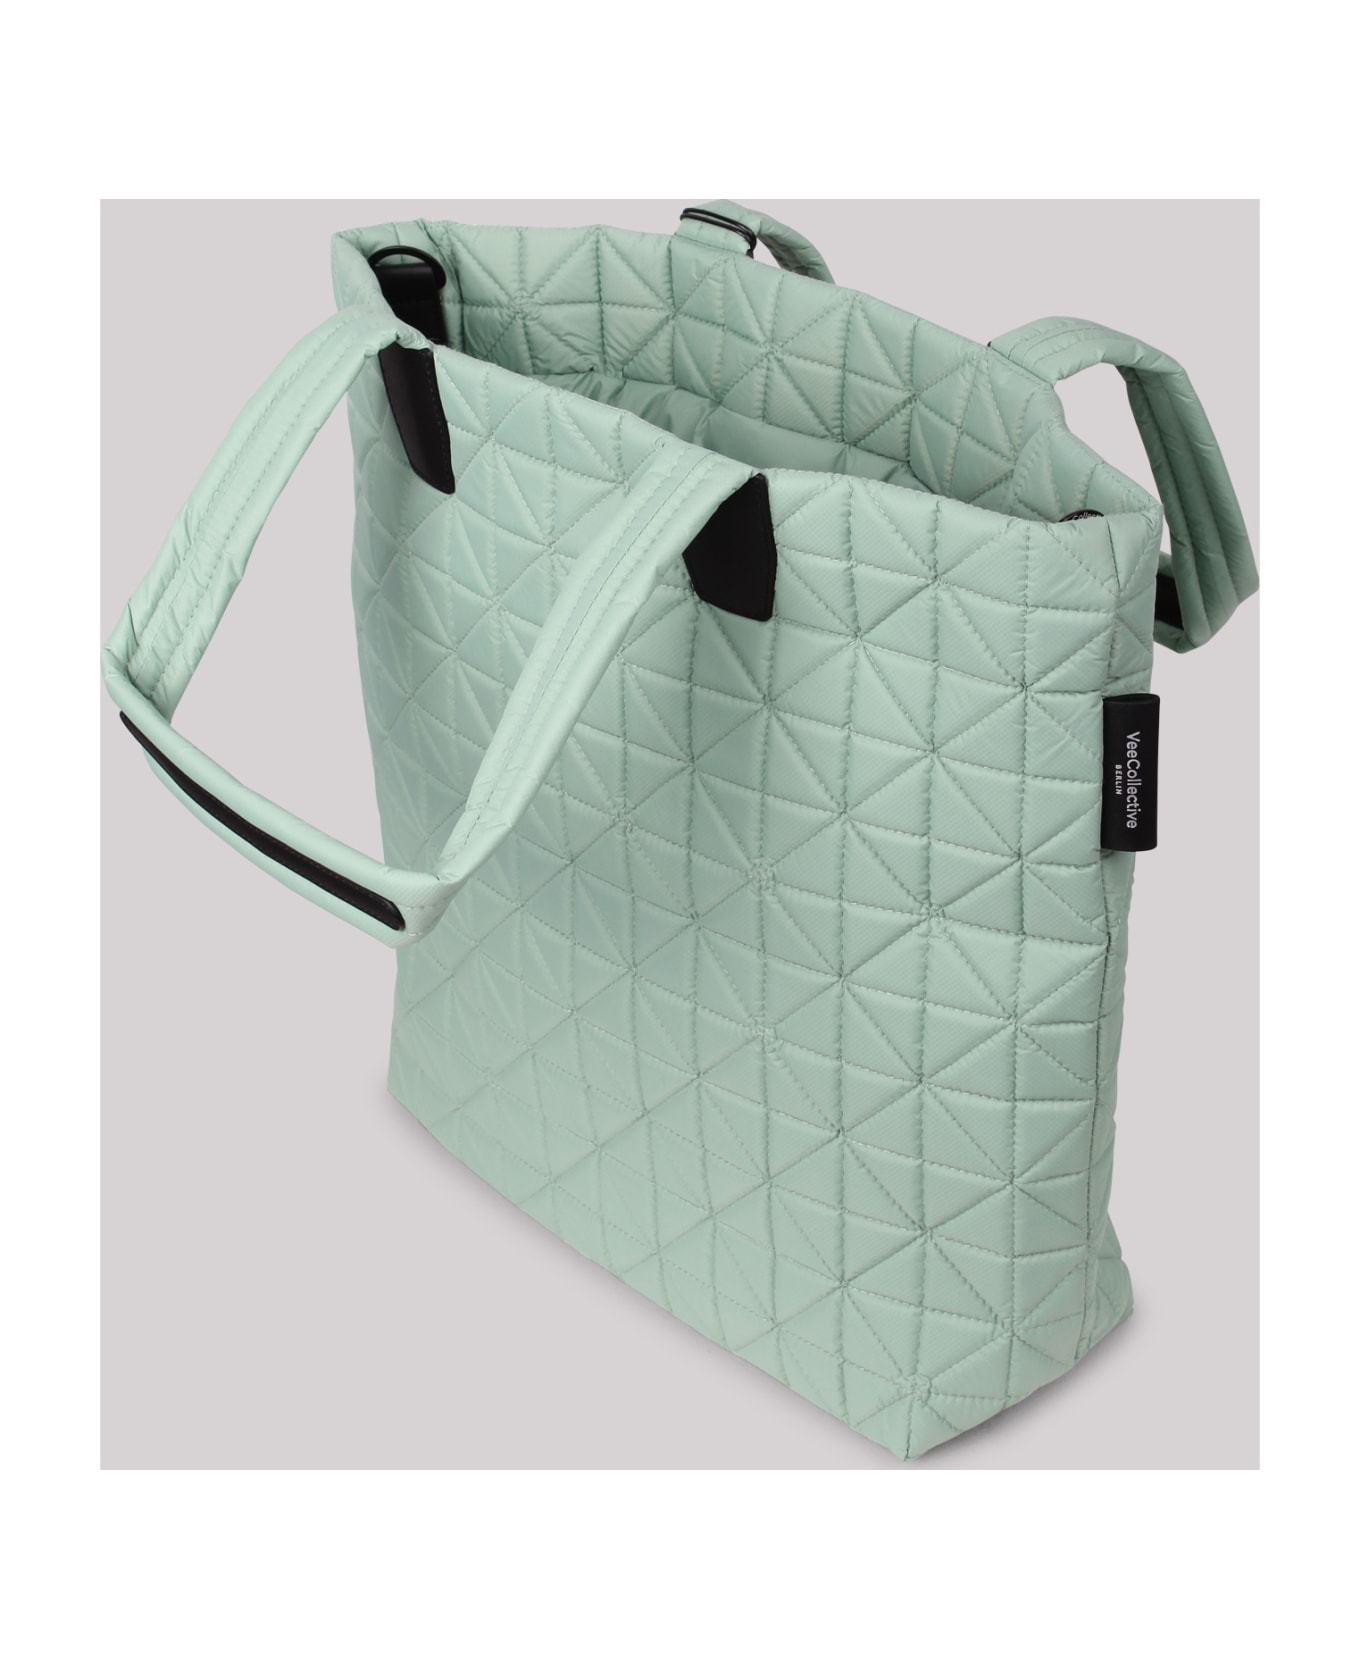 VeeCollective Vee Collective Large Vee Geometric Tote Bag